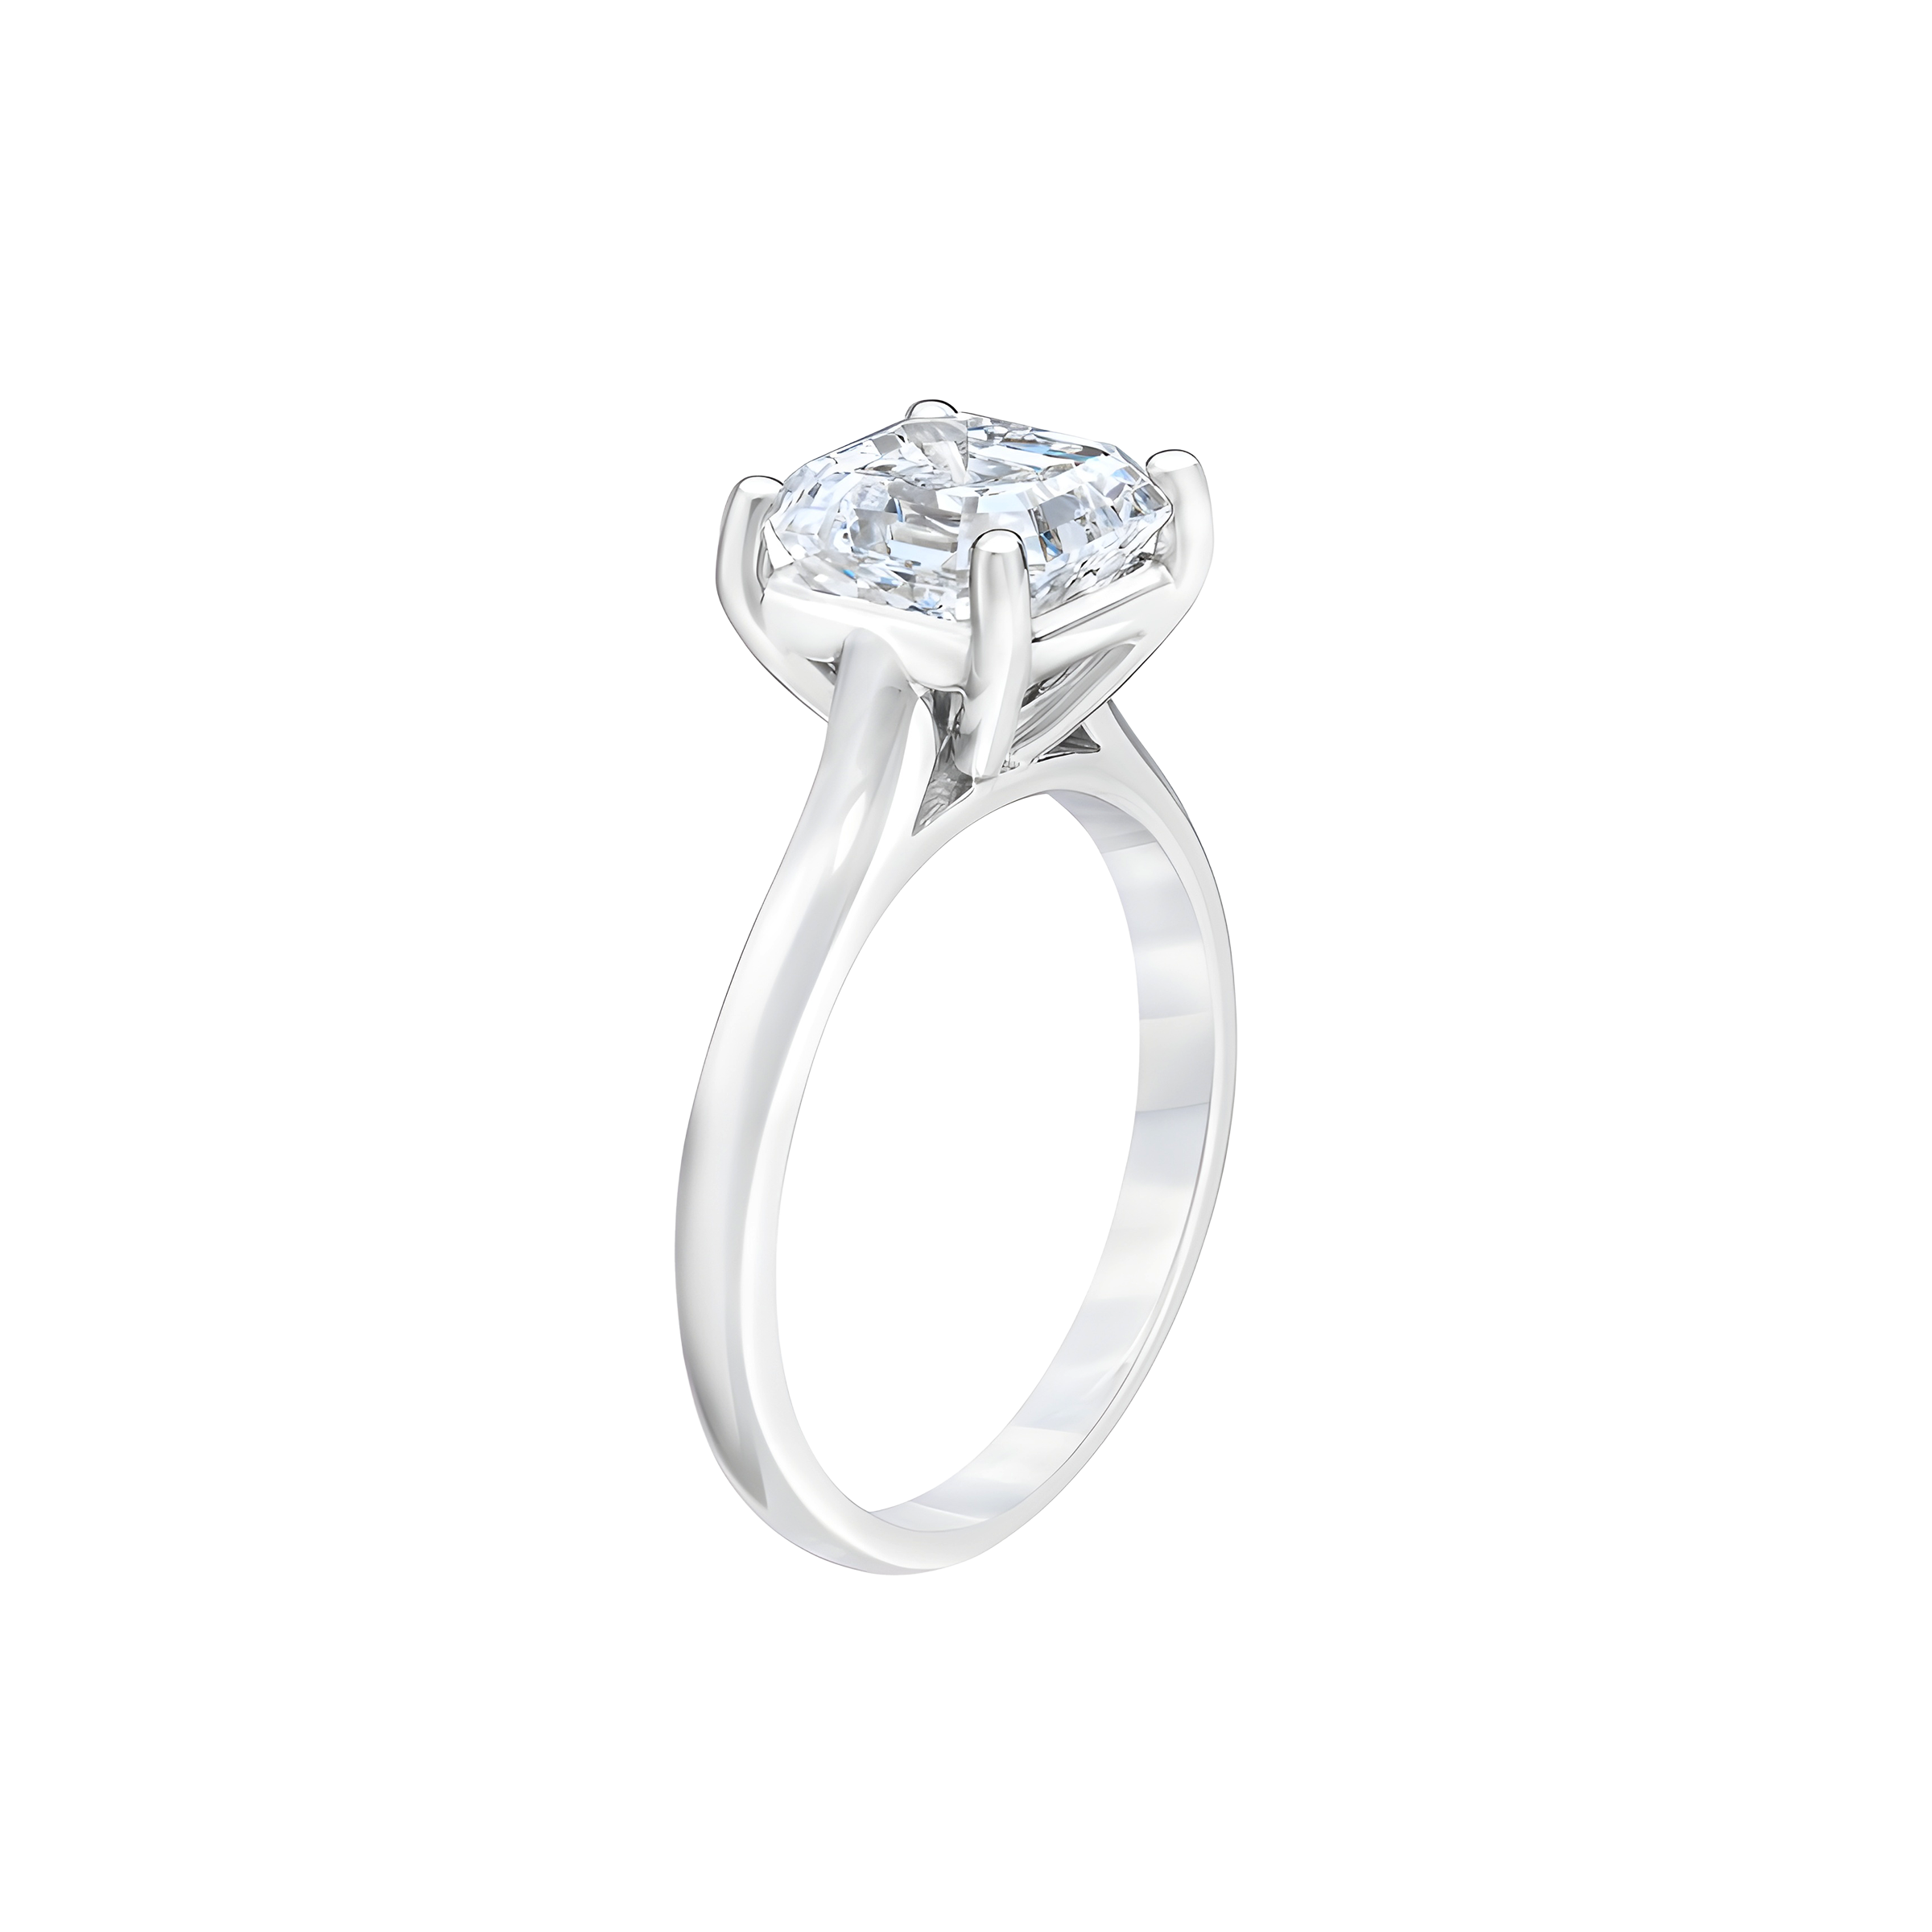 Square Emerald Cut Solitaire Diamond Engagement Ring In 18K White Gold